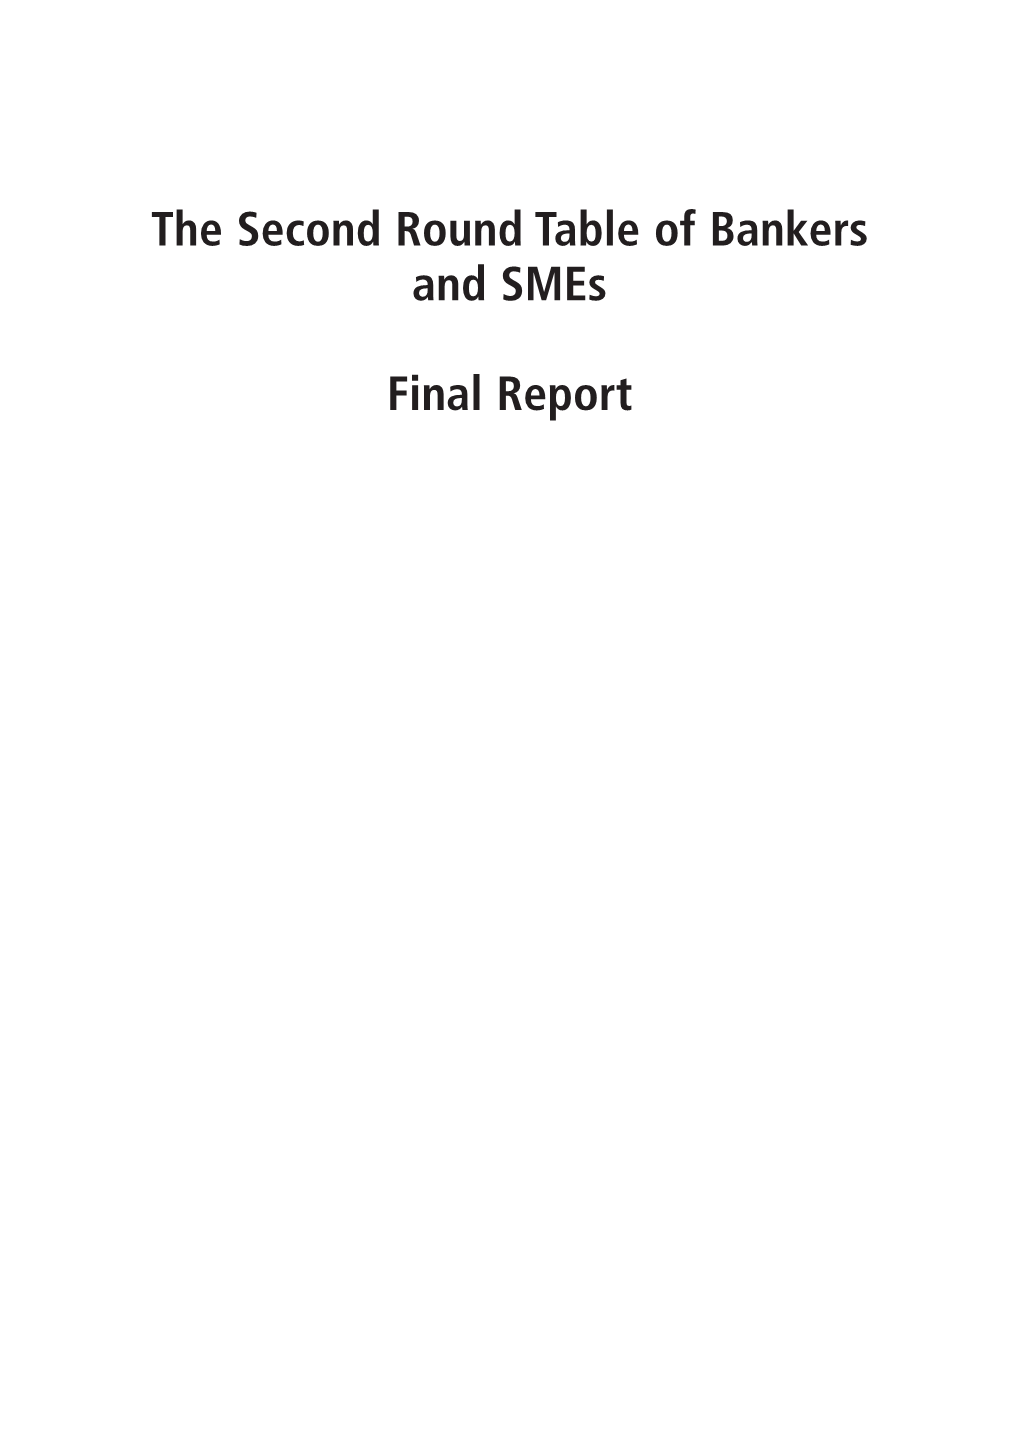 The Second Round Table of Bankers and Smes